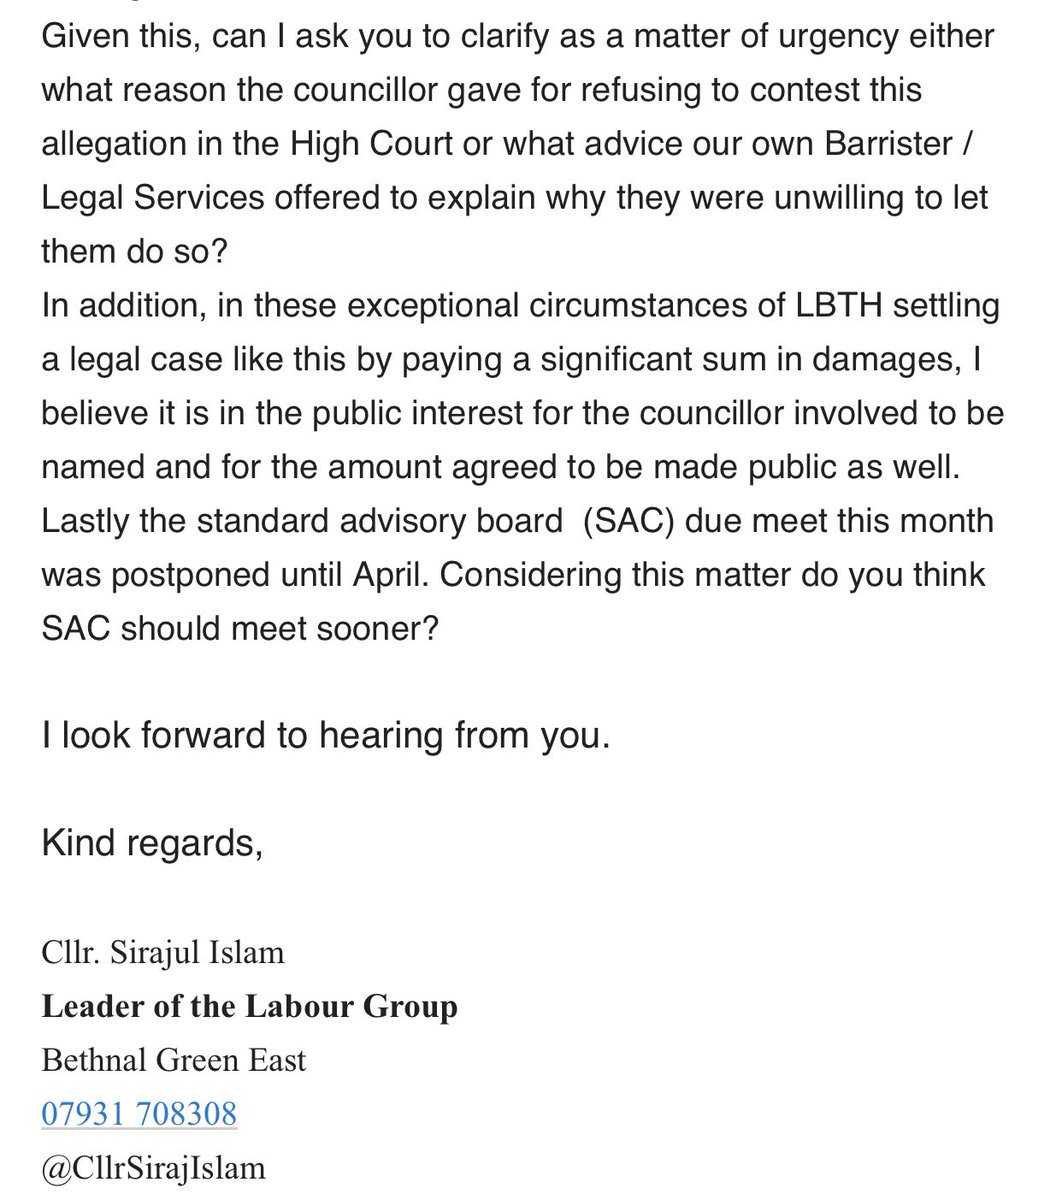 Today I wrote to the Council’s Monitoring Officer (MO) for urgent clarification regarding this matter which is now subject of public scrutiny.